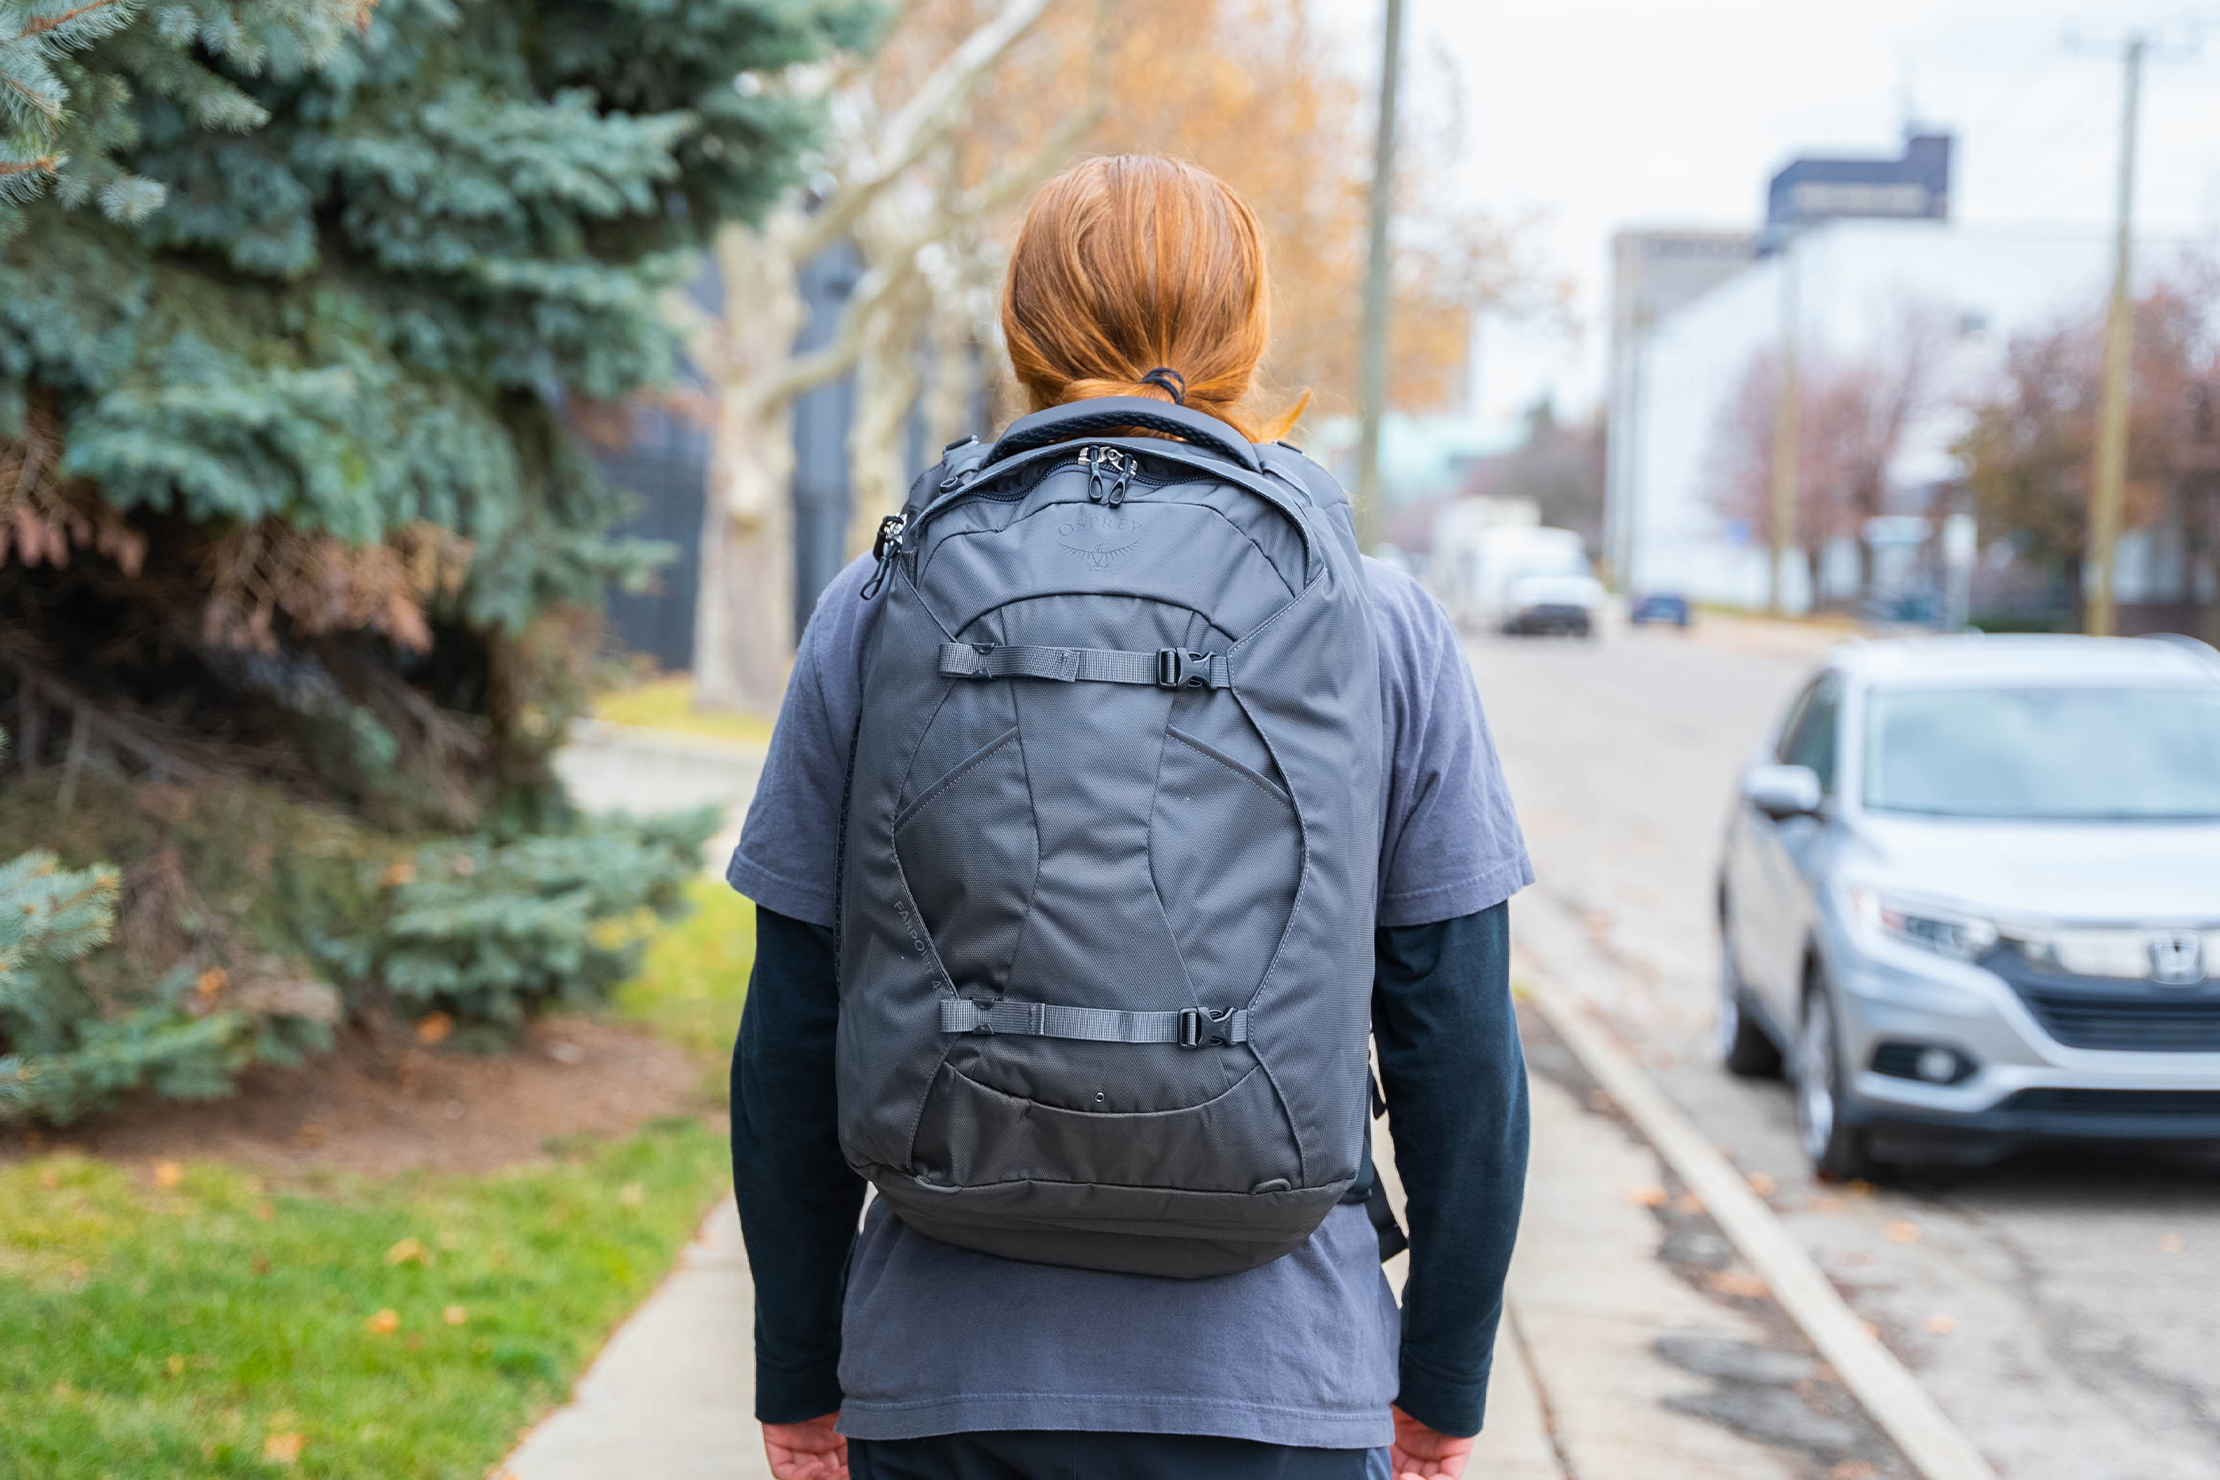 Review of Osprey Farpoint 40L. Why is this the best backpack